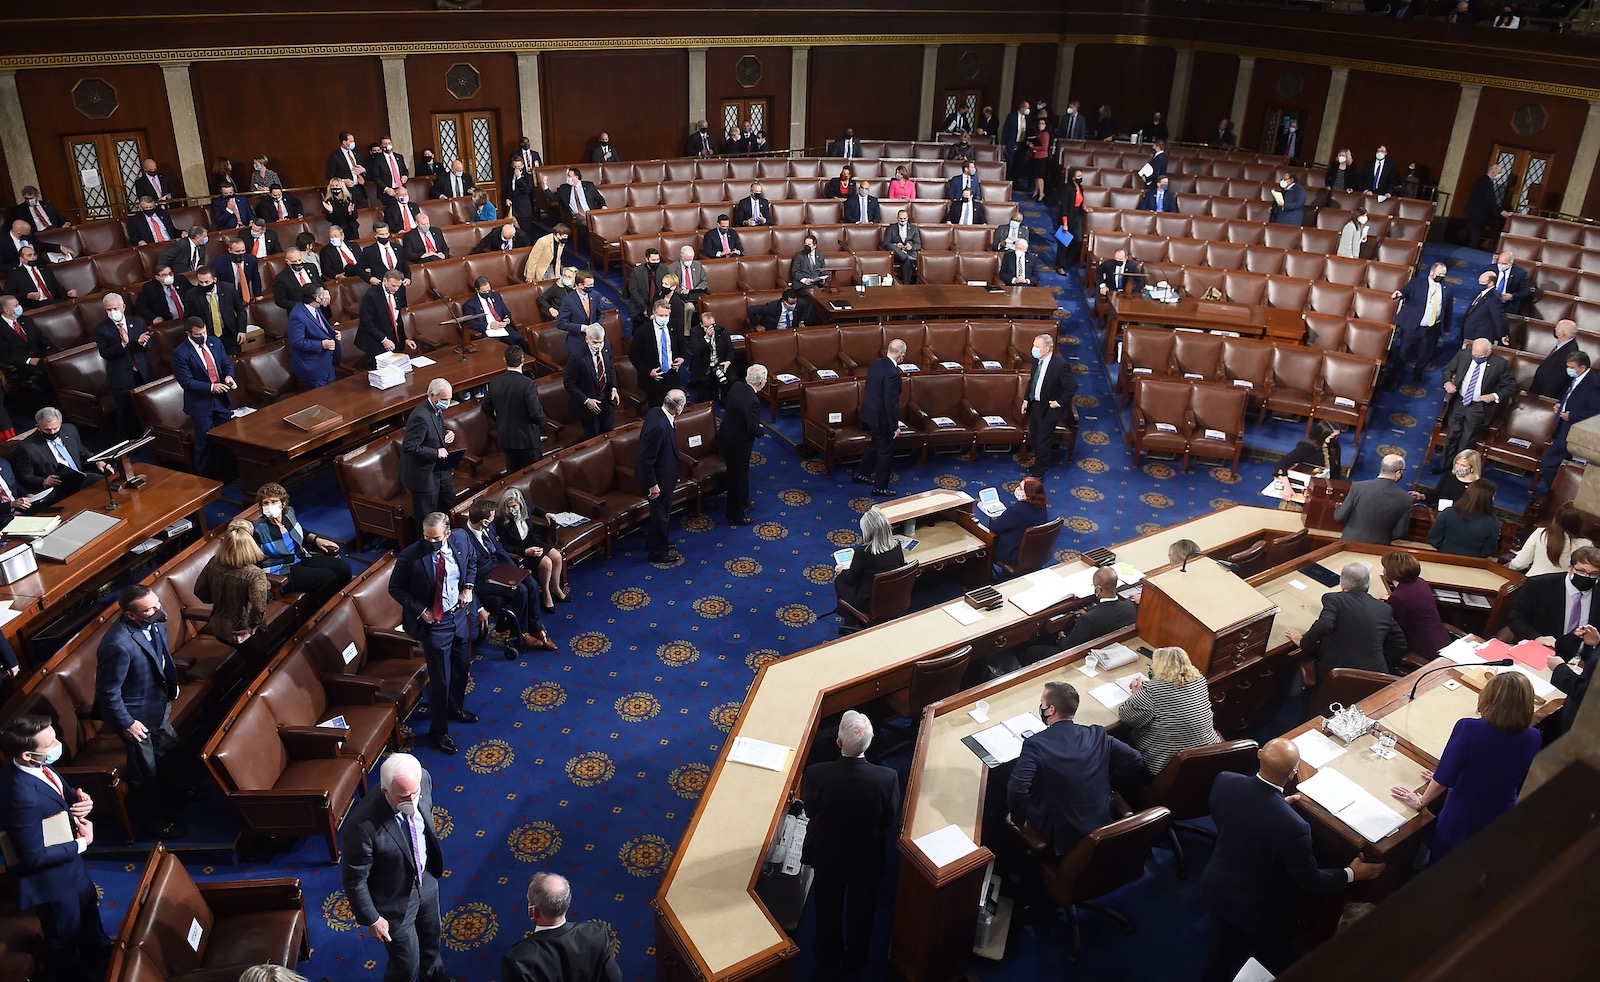 Members of Congress gathered in joint session preparing to evacuate